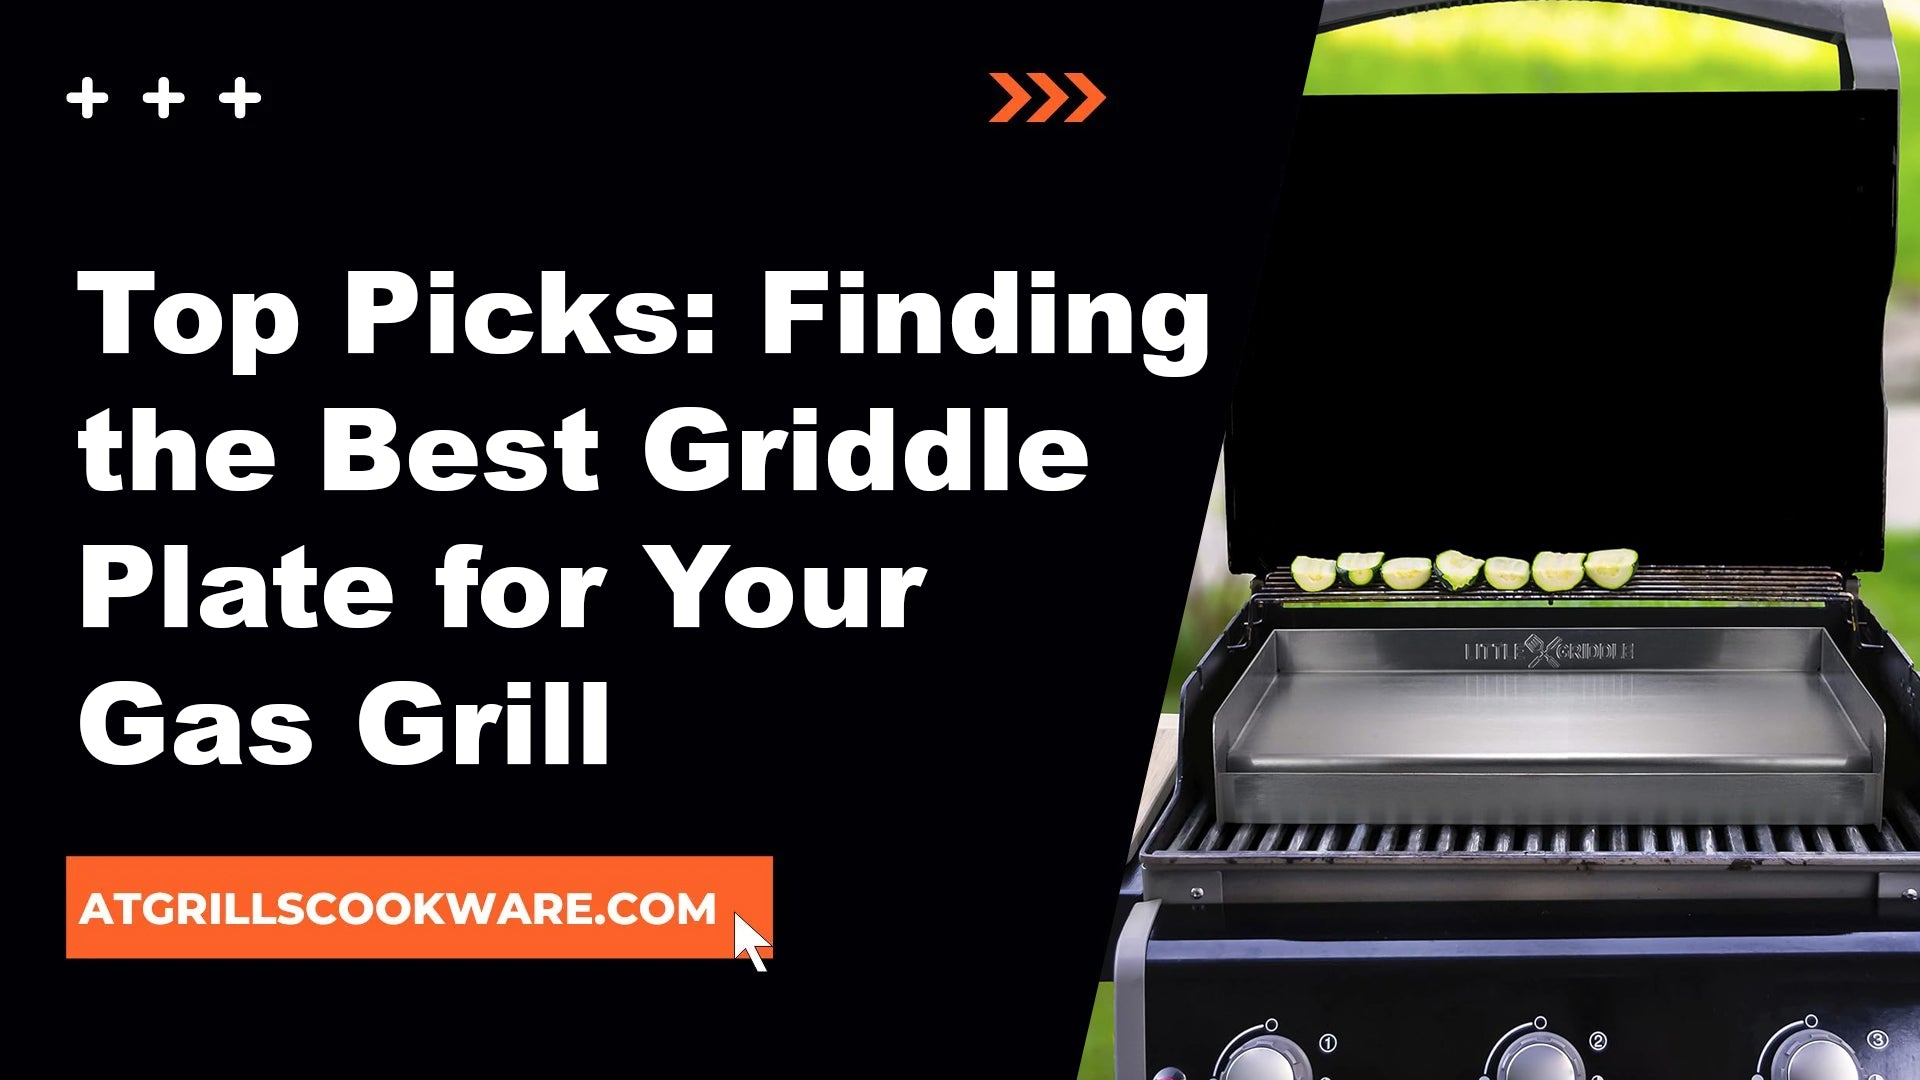 Top Picks: Finding the Best Griddle Plate for Your Gas Grill